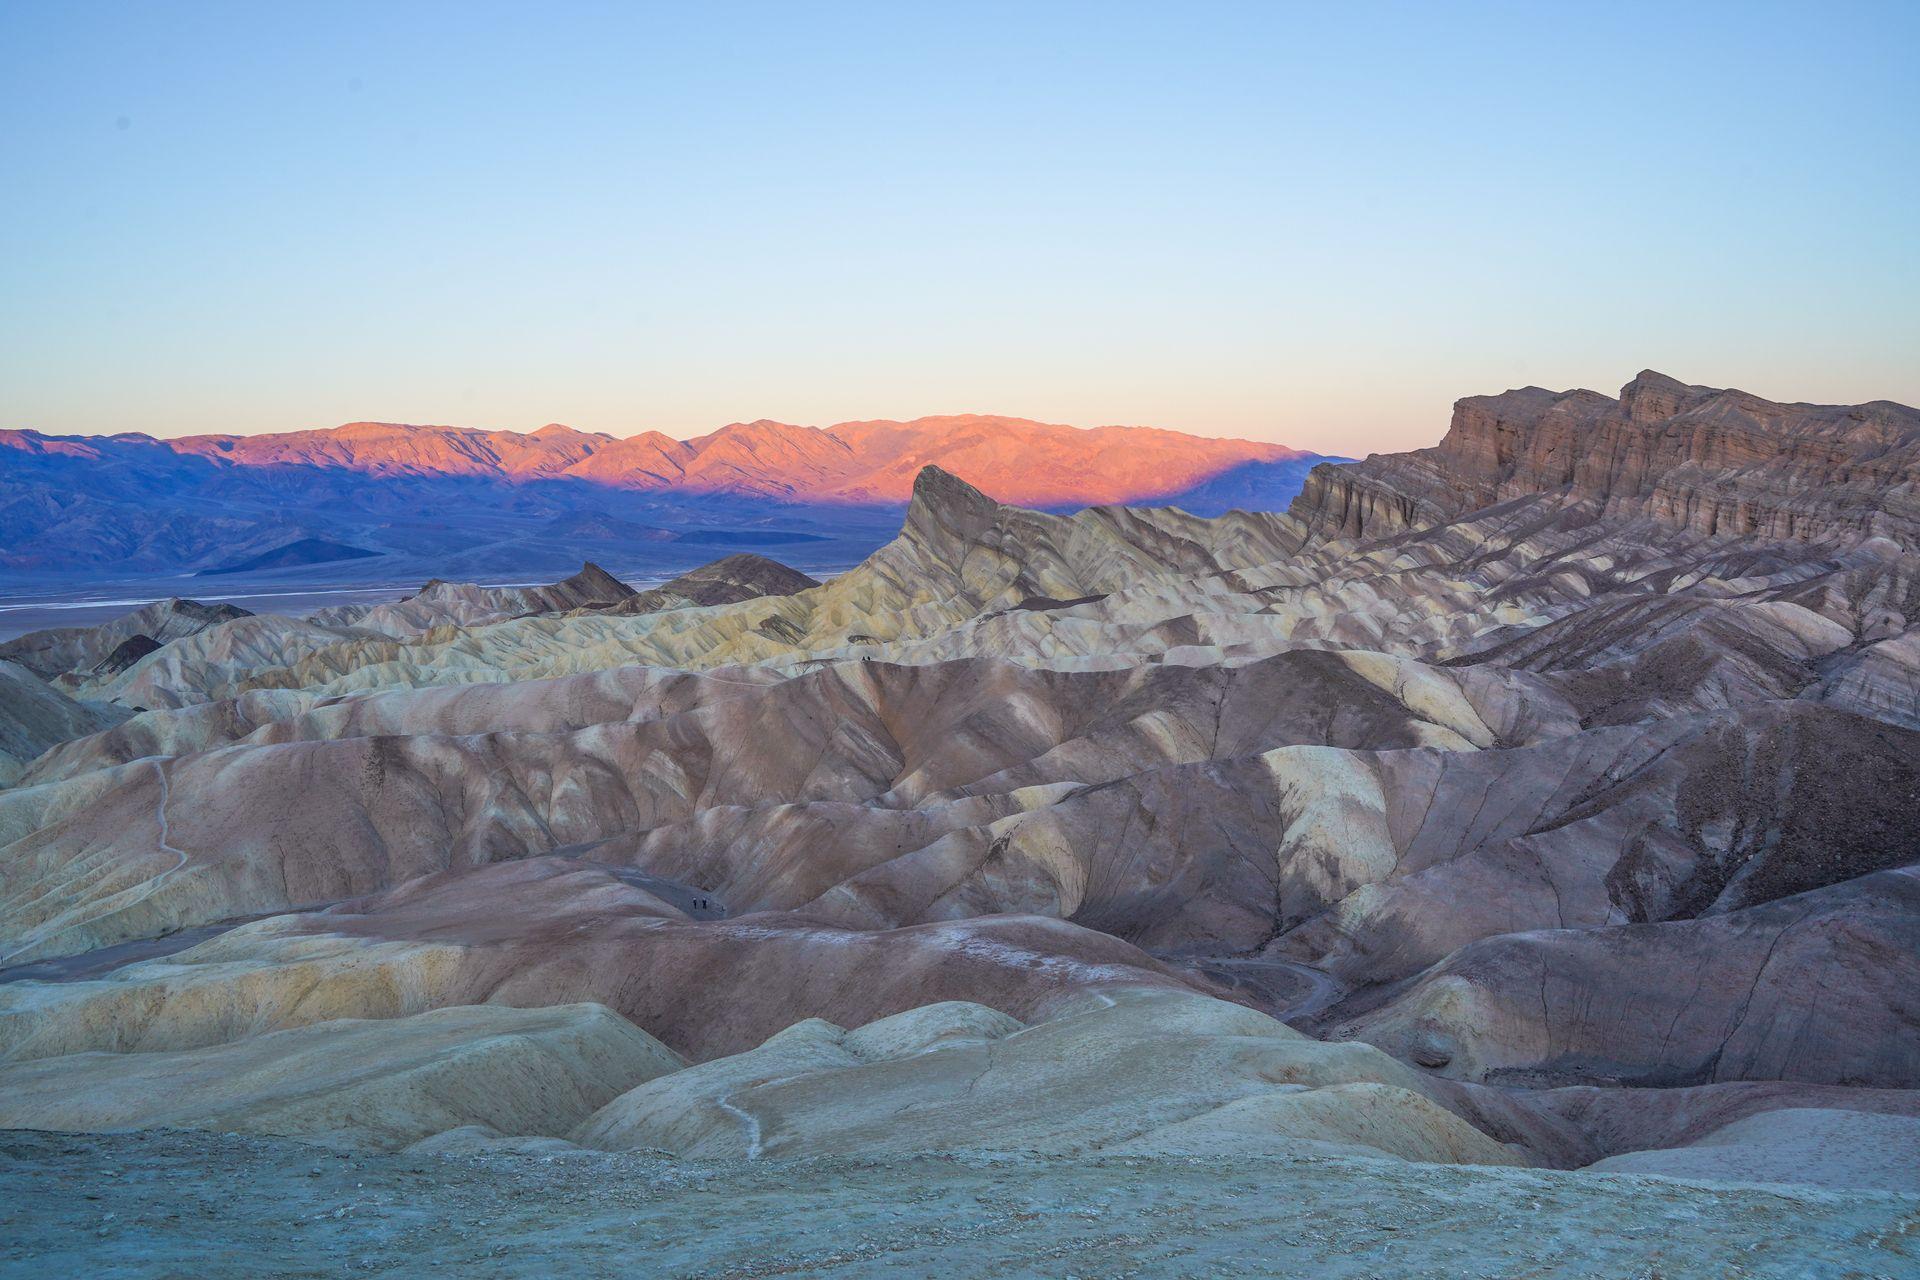 Walking the sunrise from Zabriskie Point in Death Valley National Park